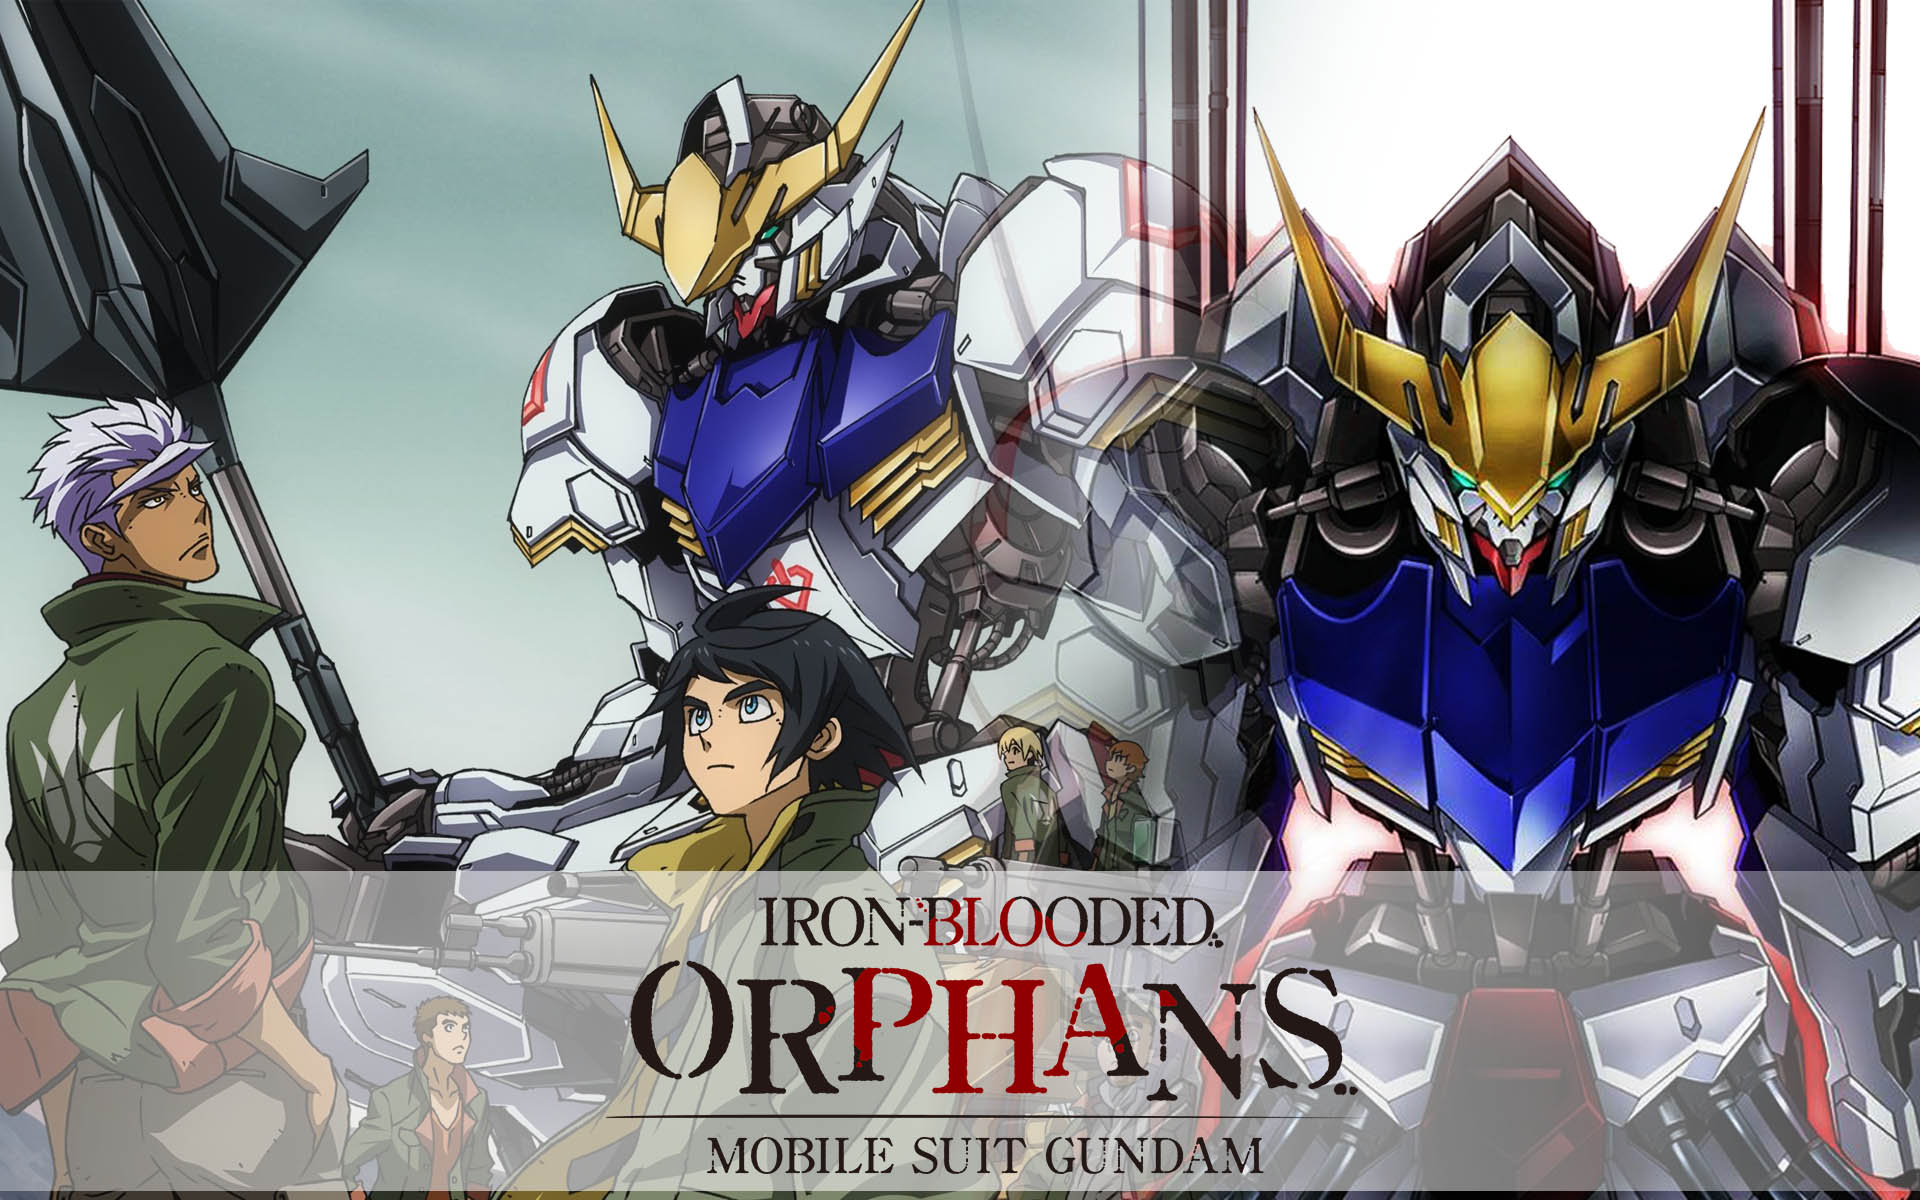 Iron-blooded orphans